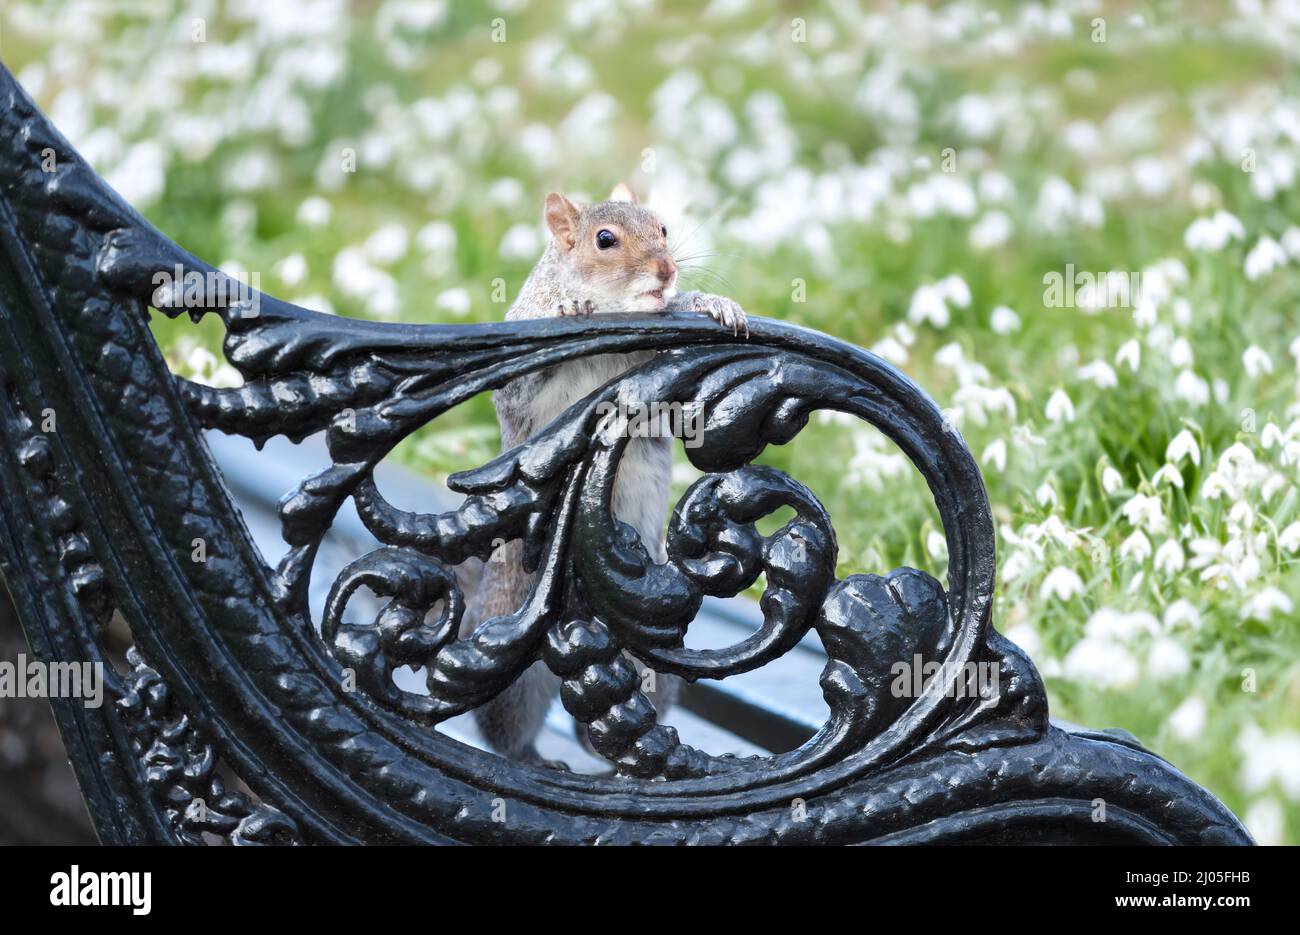 Close-up of a Grey Squirrel on a metal bench in a park in spring, UK. Stock Photo